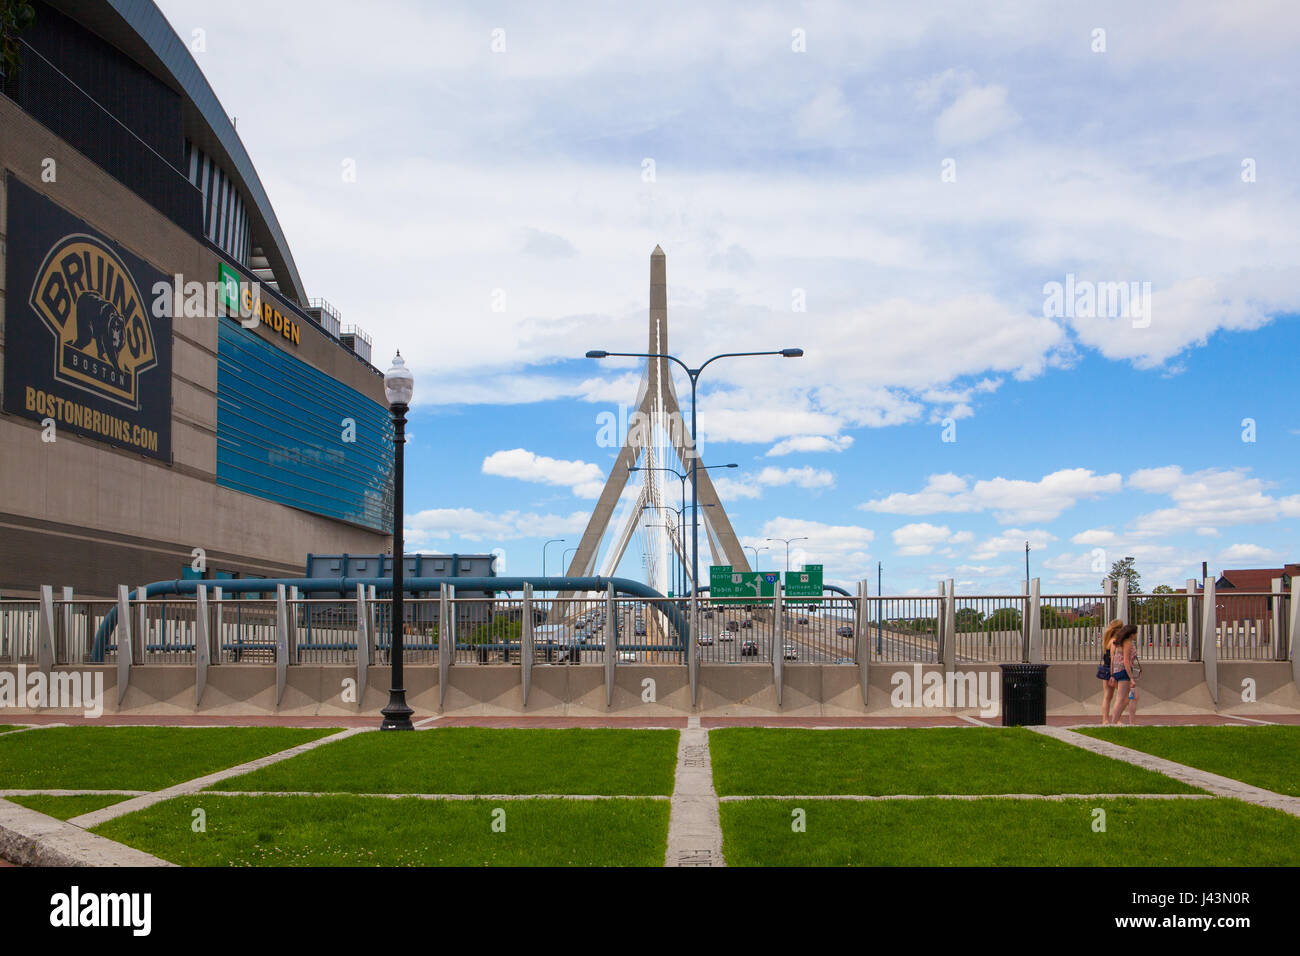 Td garden boston hi-res stock photography and images - Alamy